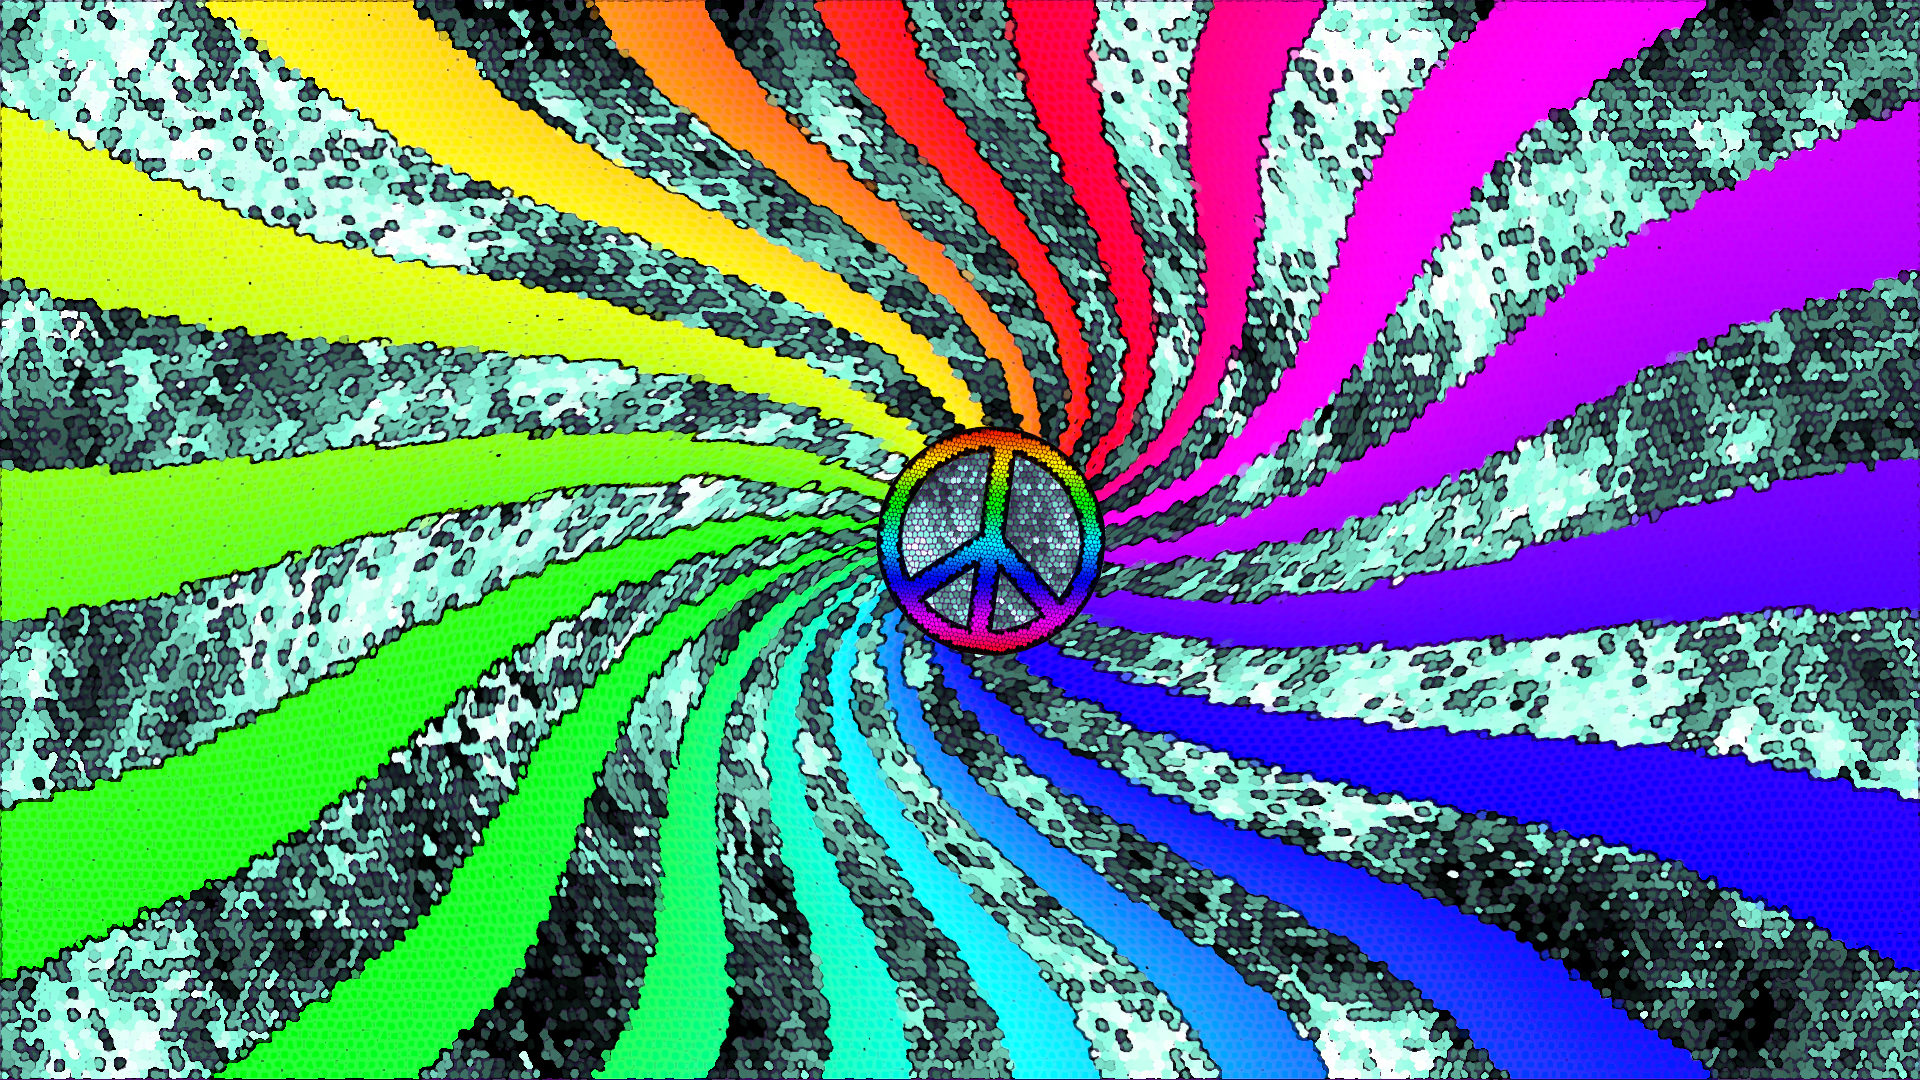 Colorful Peace Signs Wallpaper Full HDq